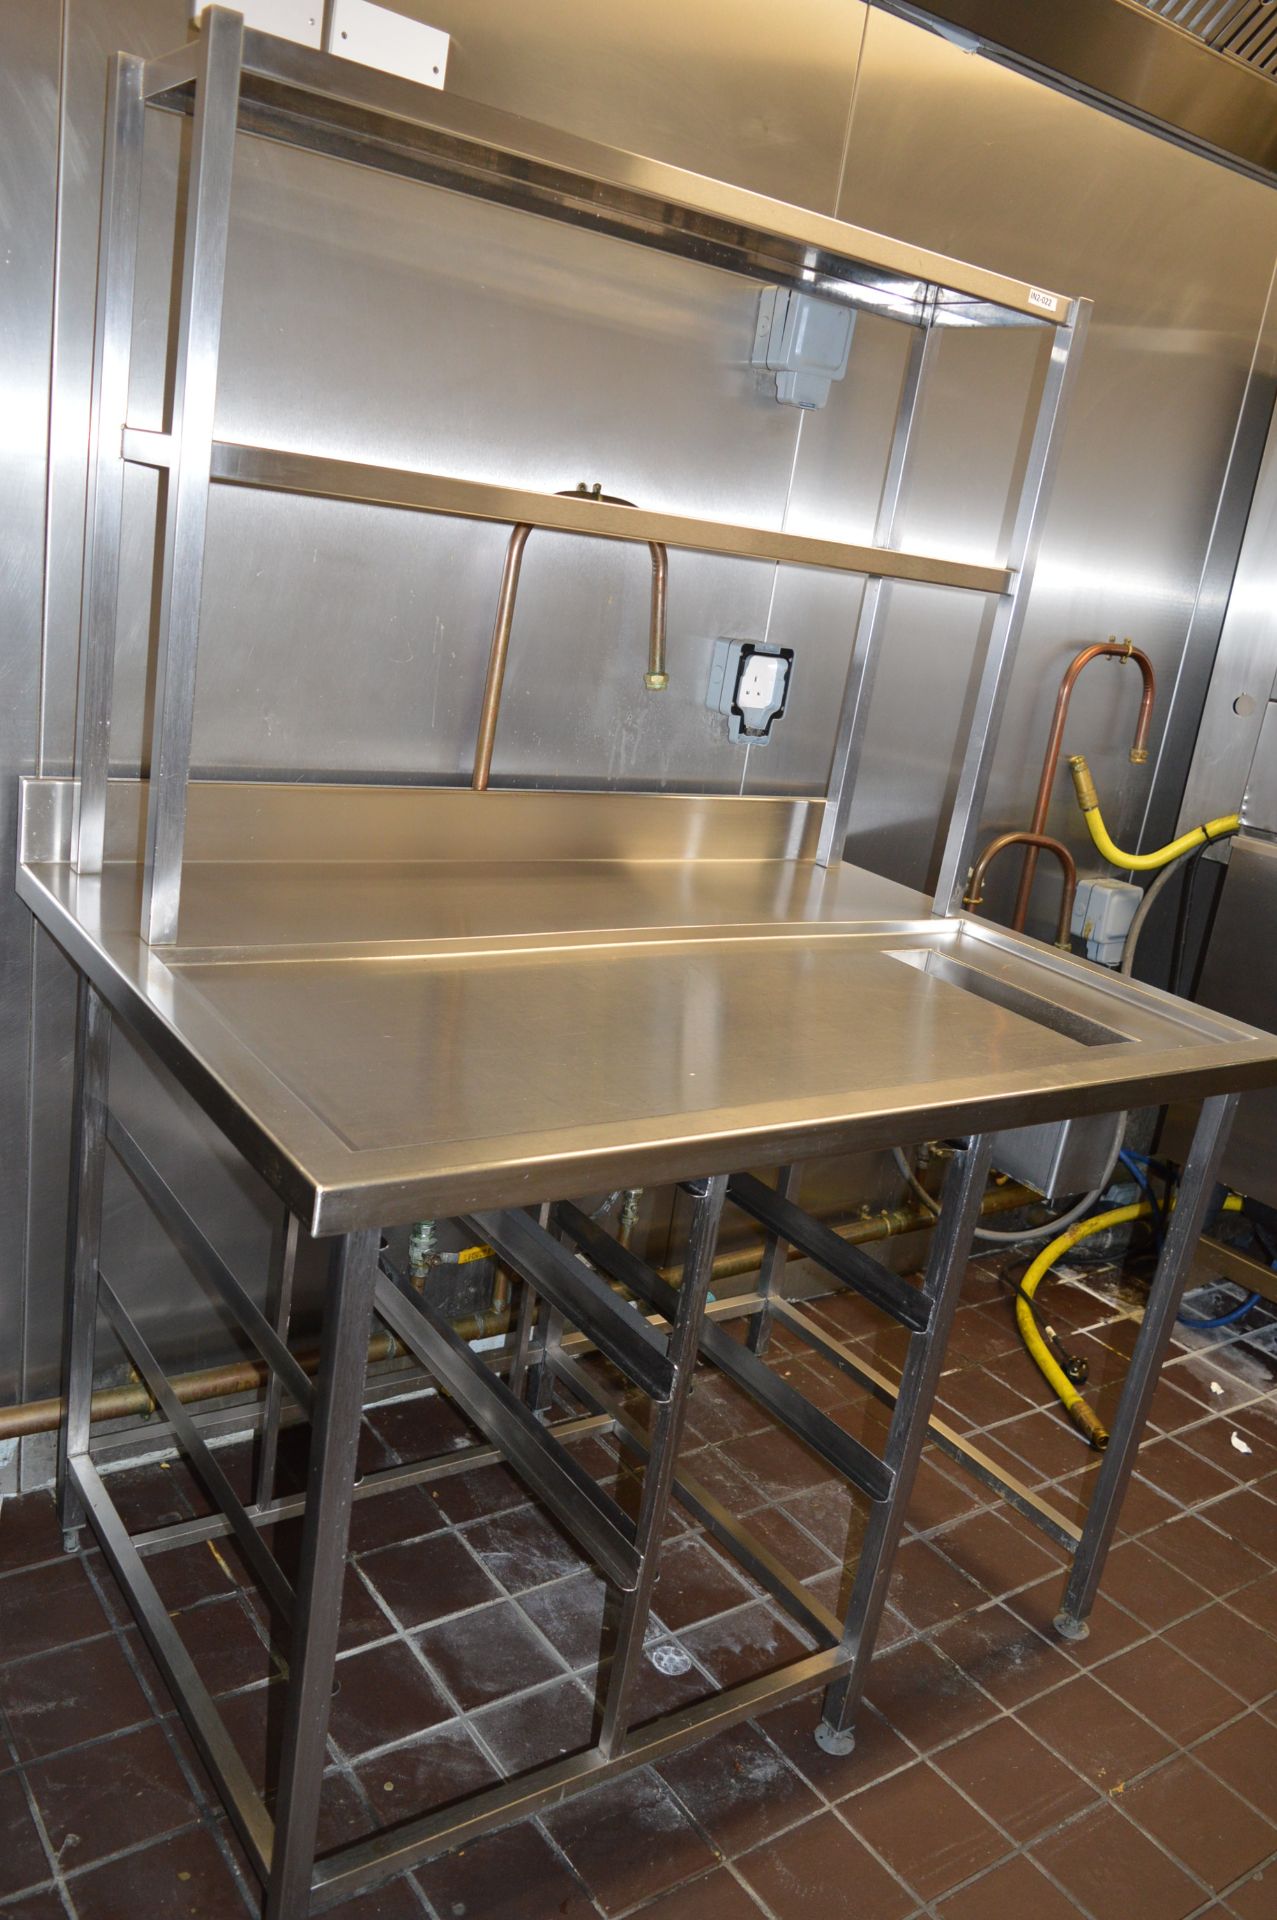 1 x Stainless Steel Prep Bench With Undercounter Shelves, Bin Chute and Overhead Shelves - H87/171 x - Image 3 of 7